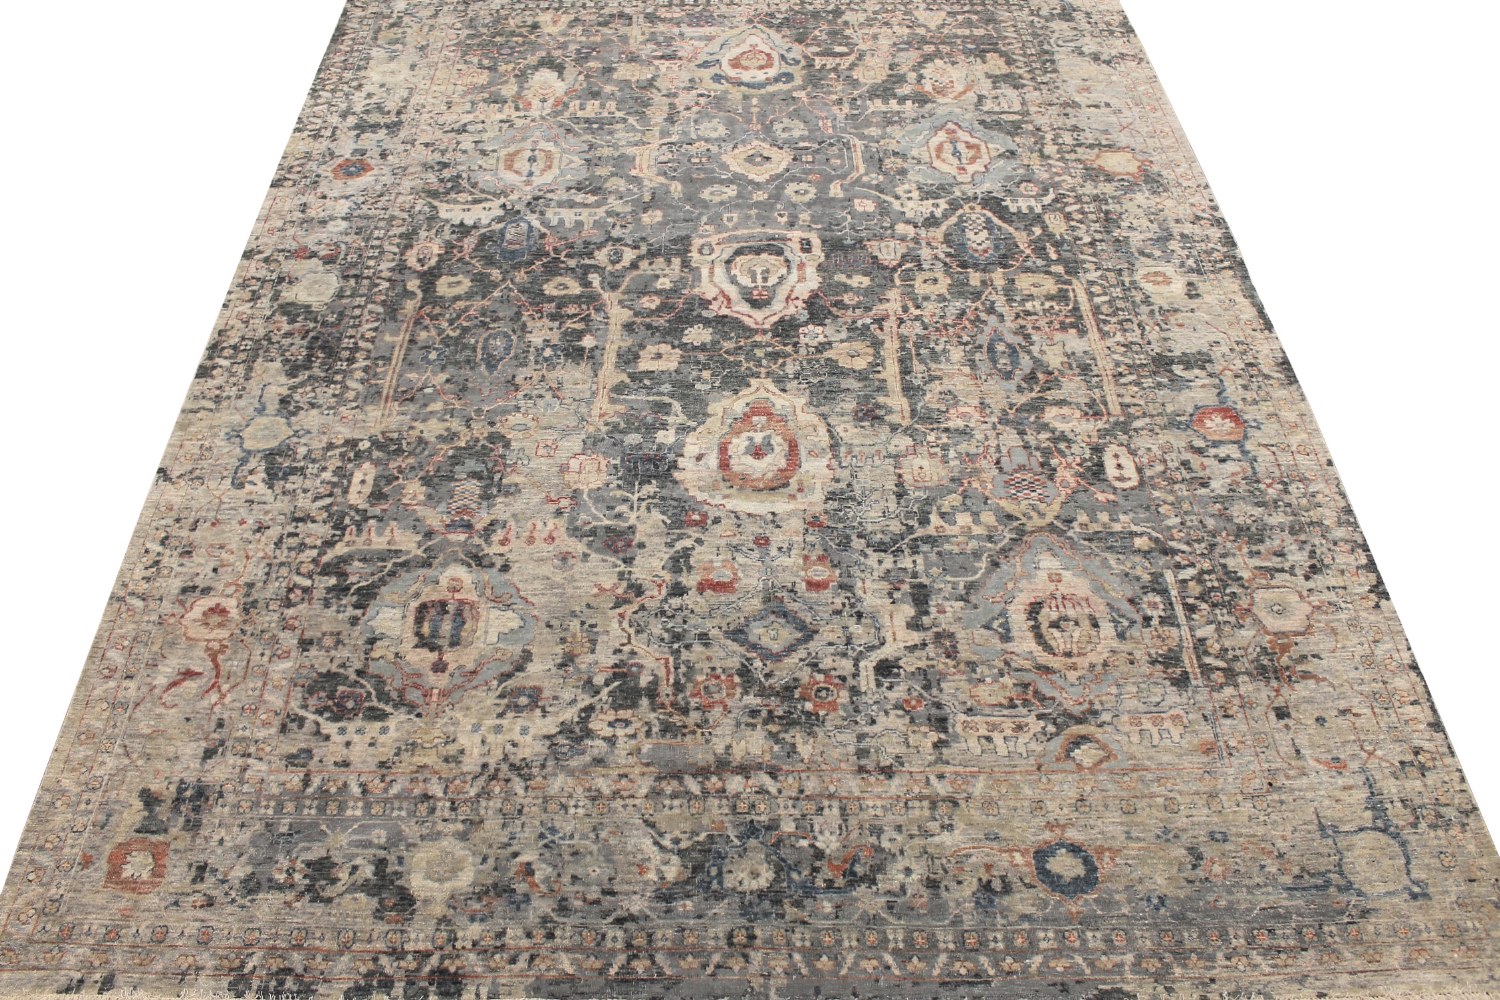 10x14 Aryana & Antique Revivals Hand Knotted Wool Area Rug - MR028539